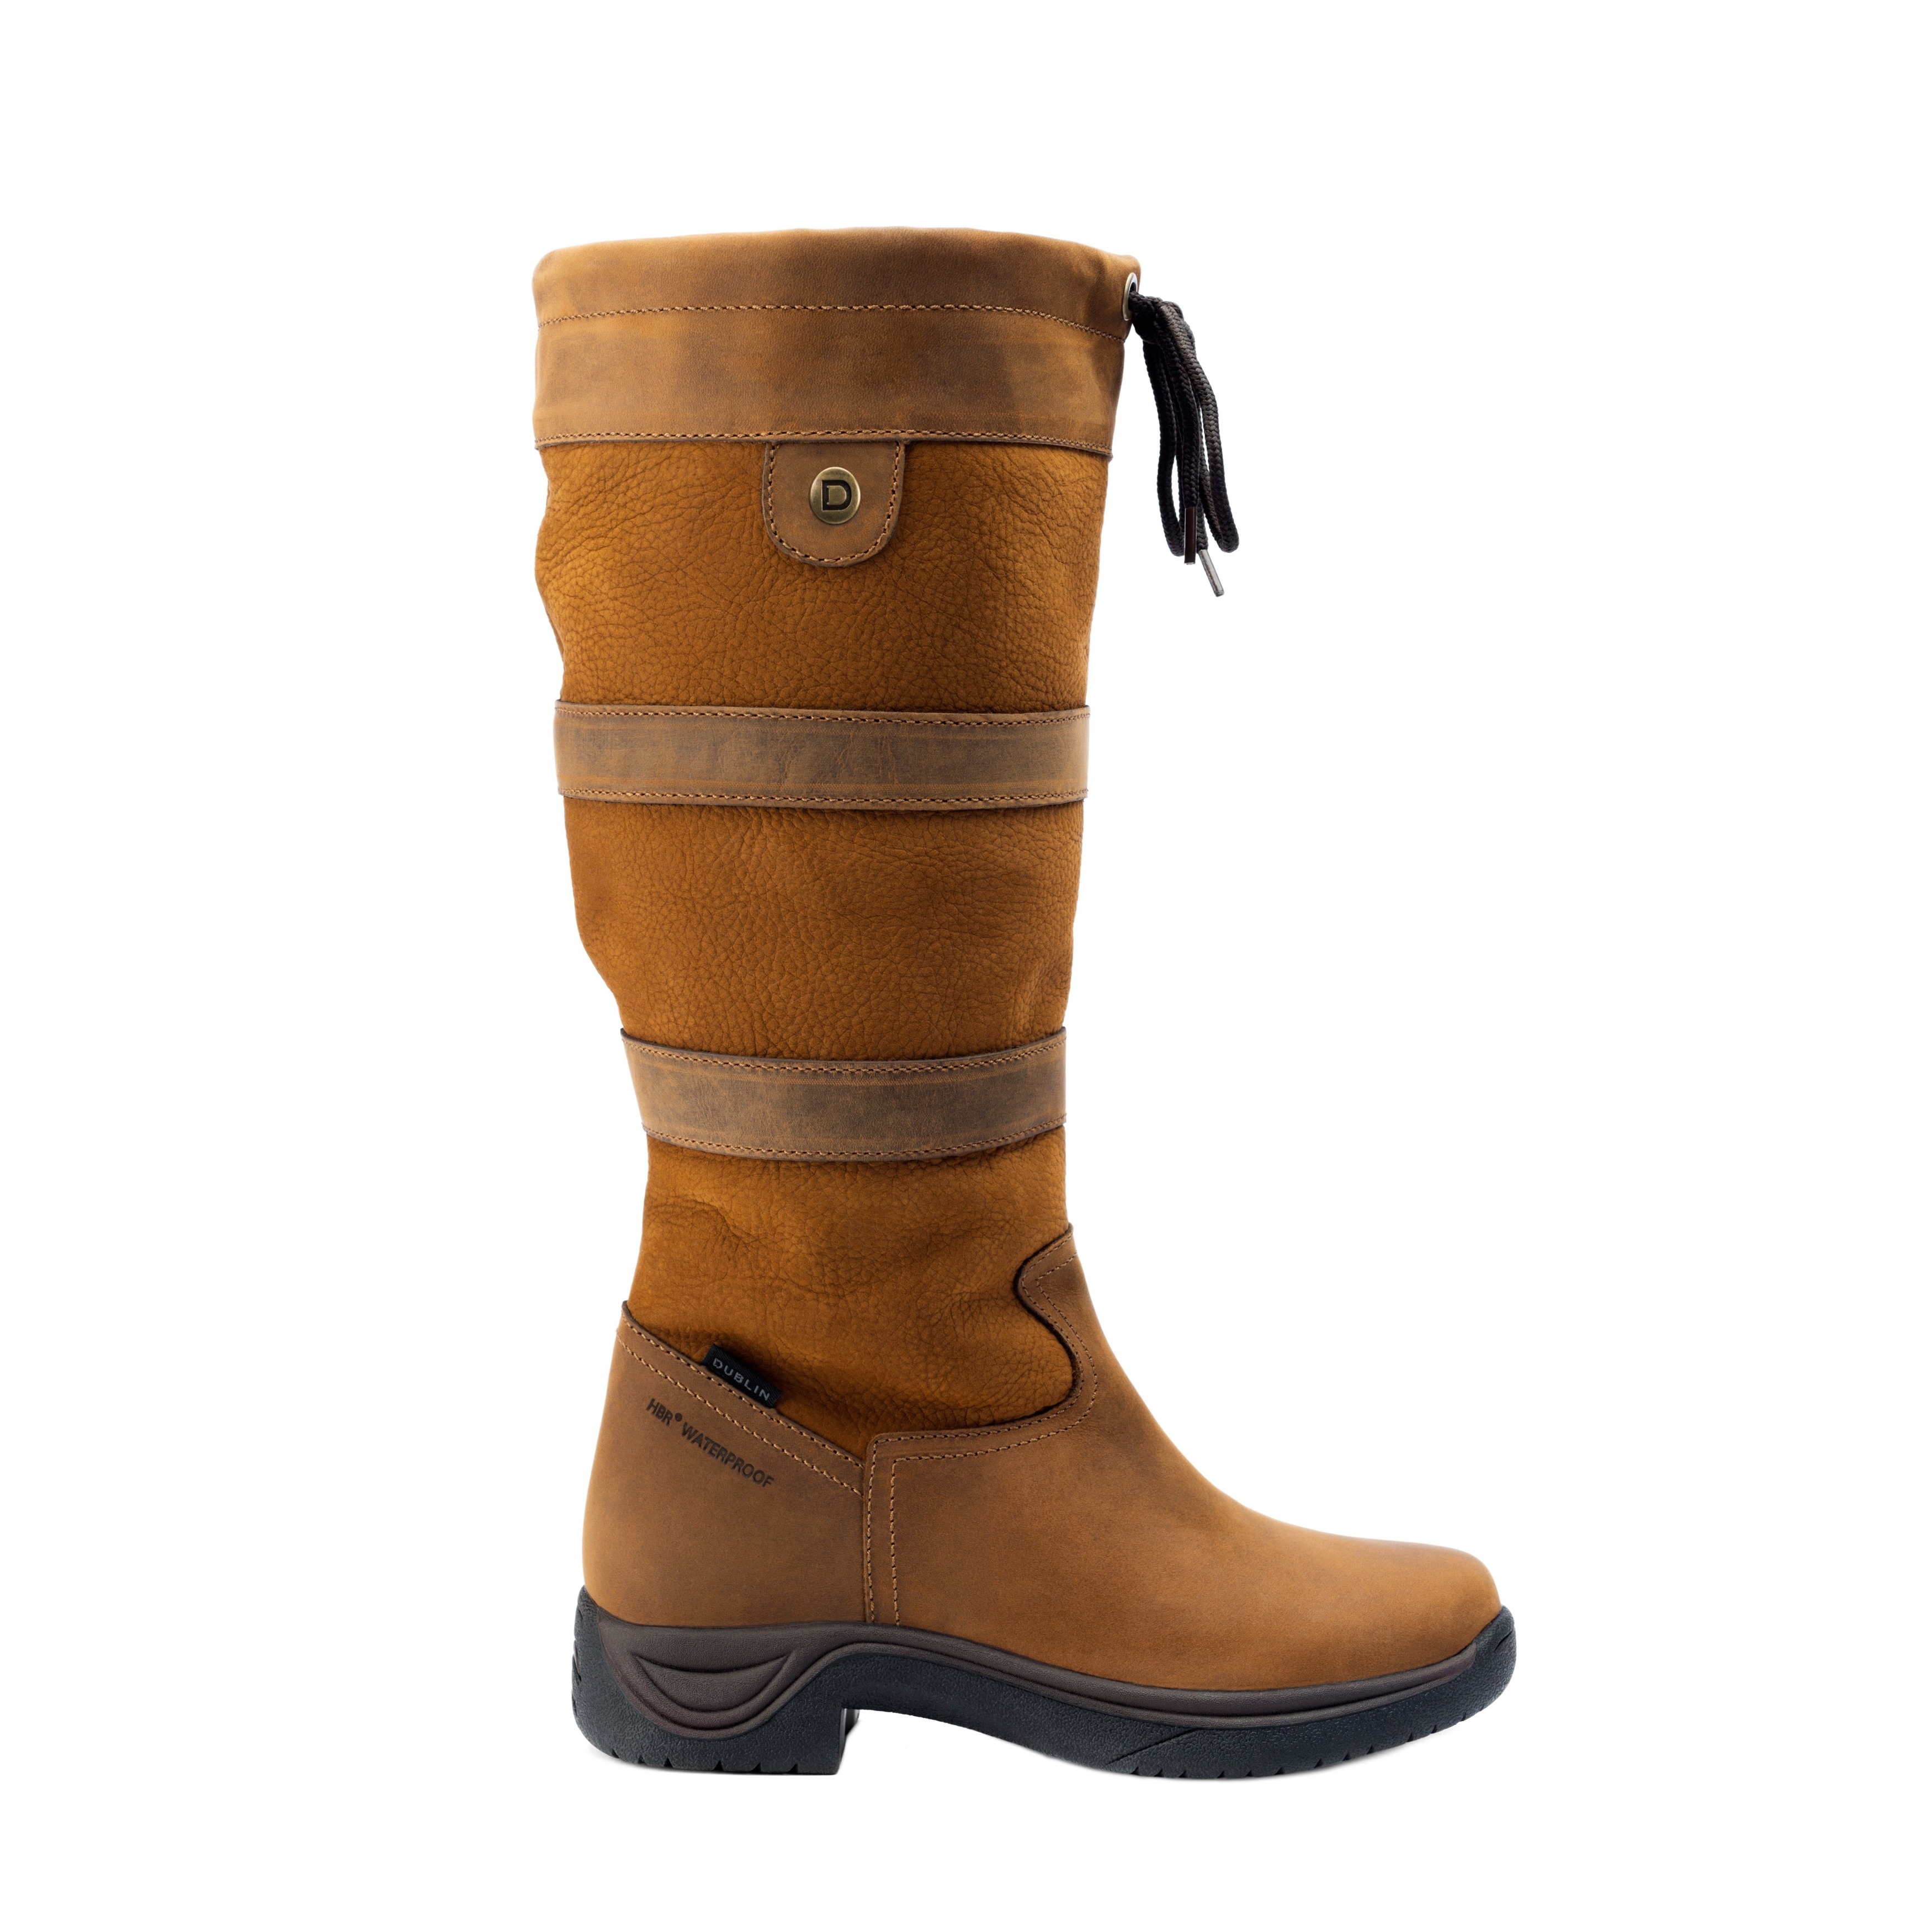 Dublin River Waterproof Leather Lifestyle Boots III with Rubber Sole